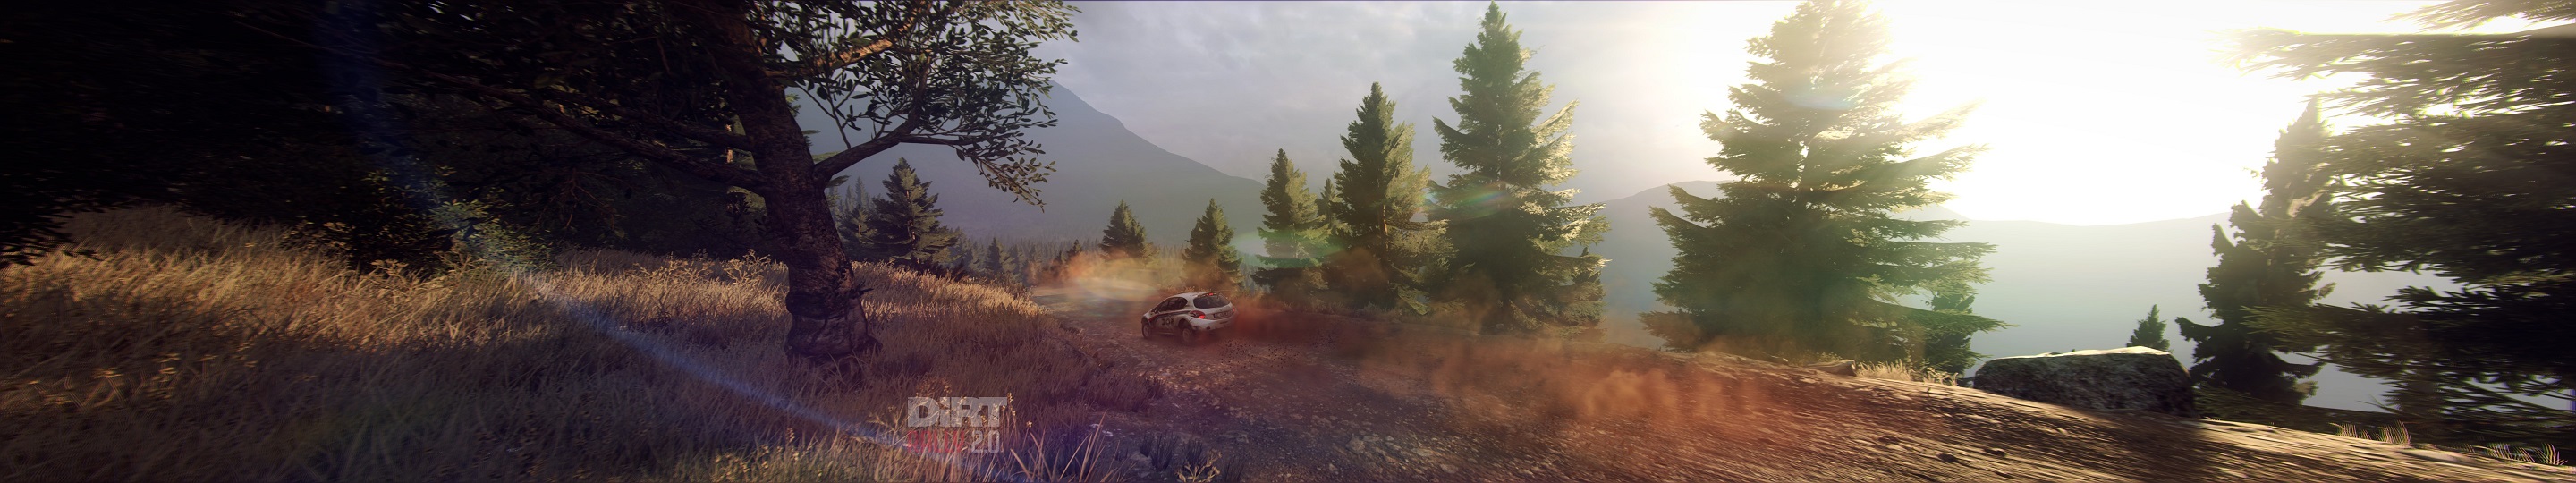 2 DIRT RALLY 2 GREECE with R5 PEUGEOT copy.jpg